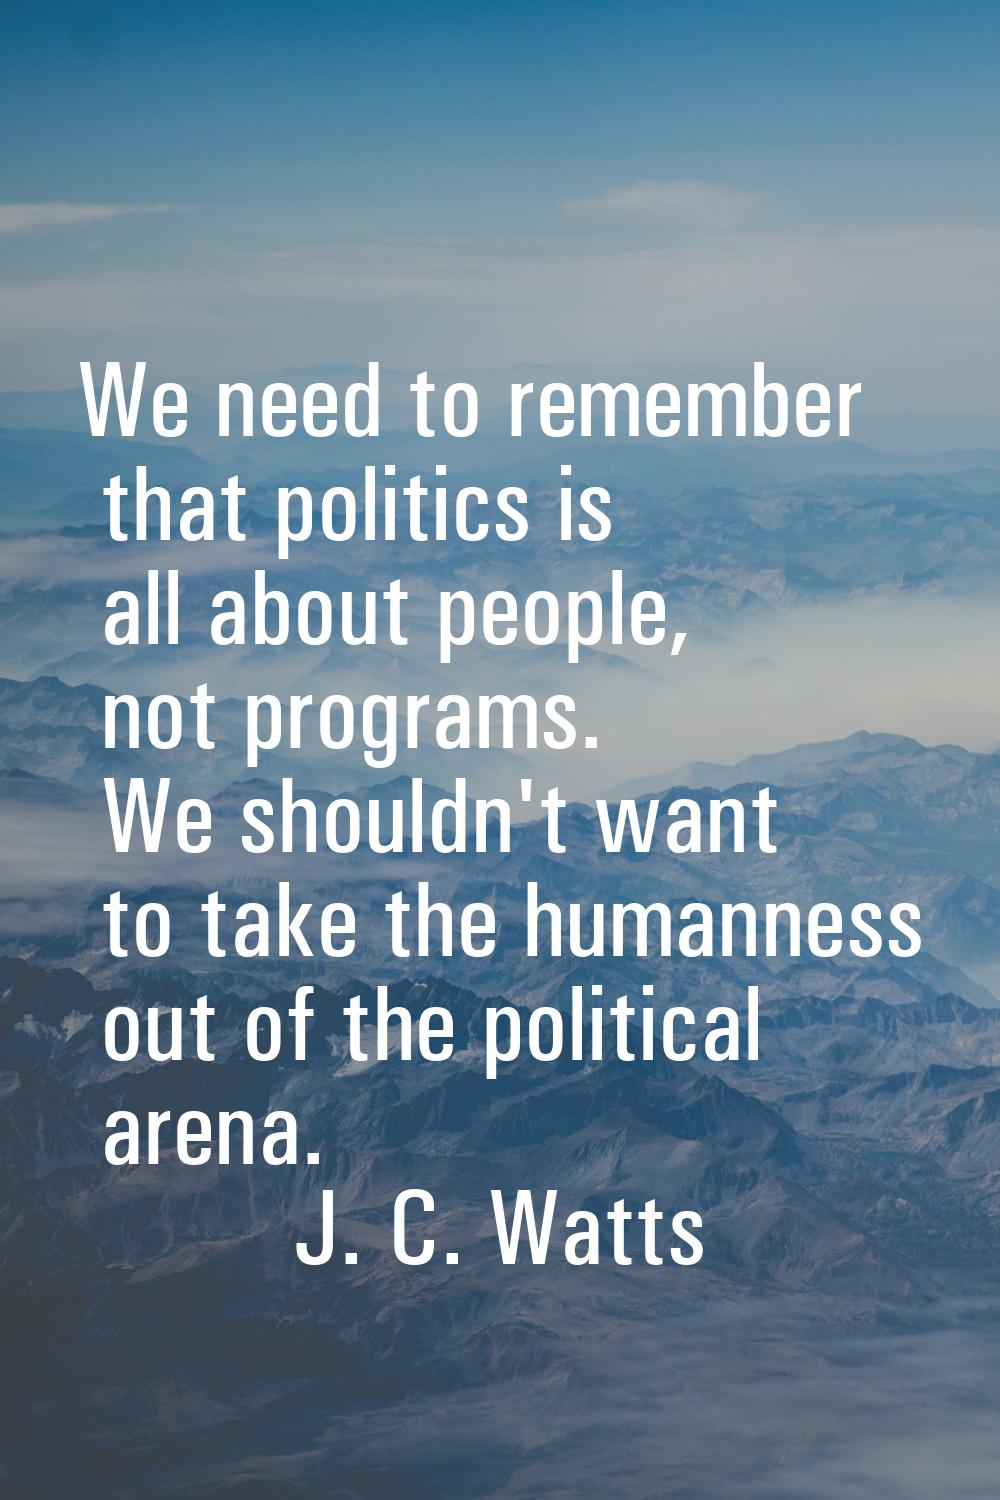 We need to remember that politics is all about people, not programs. We shouldn't want to take the 